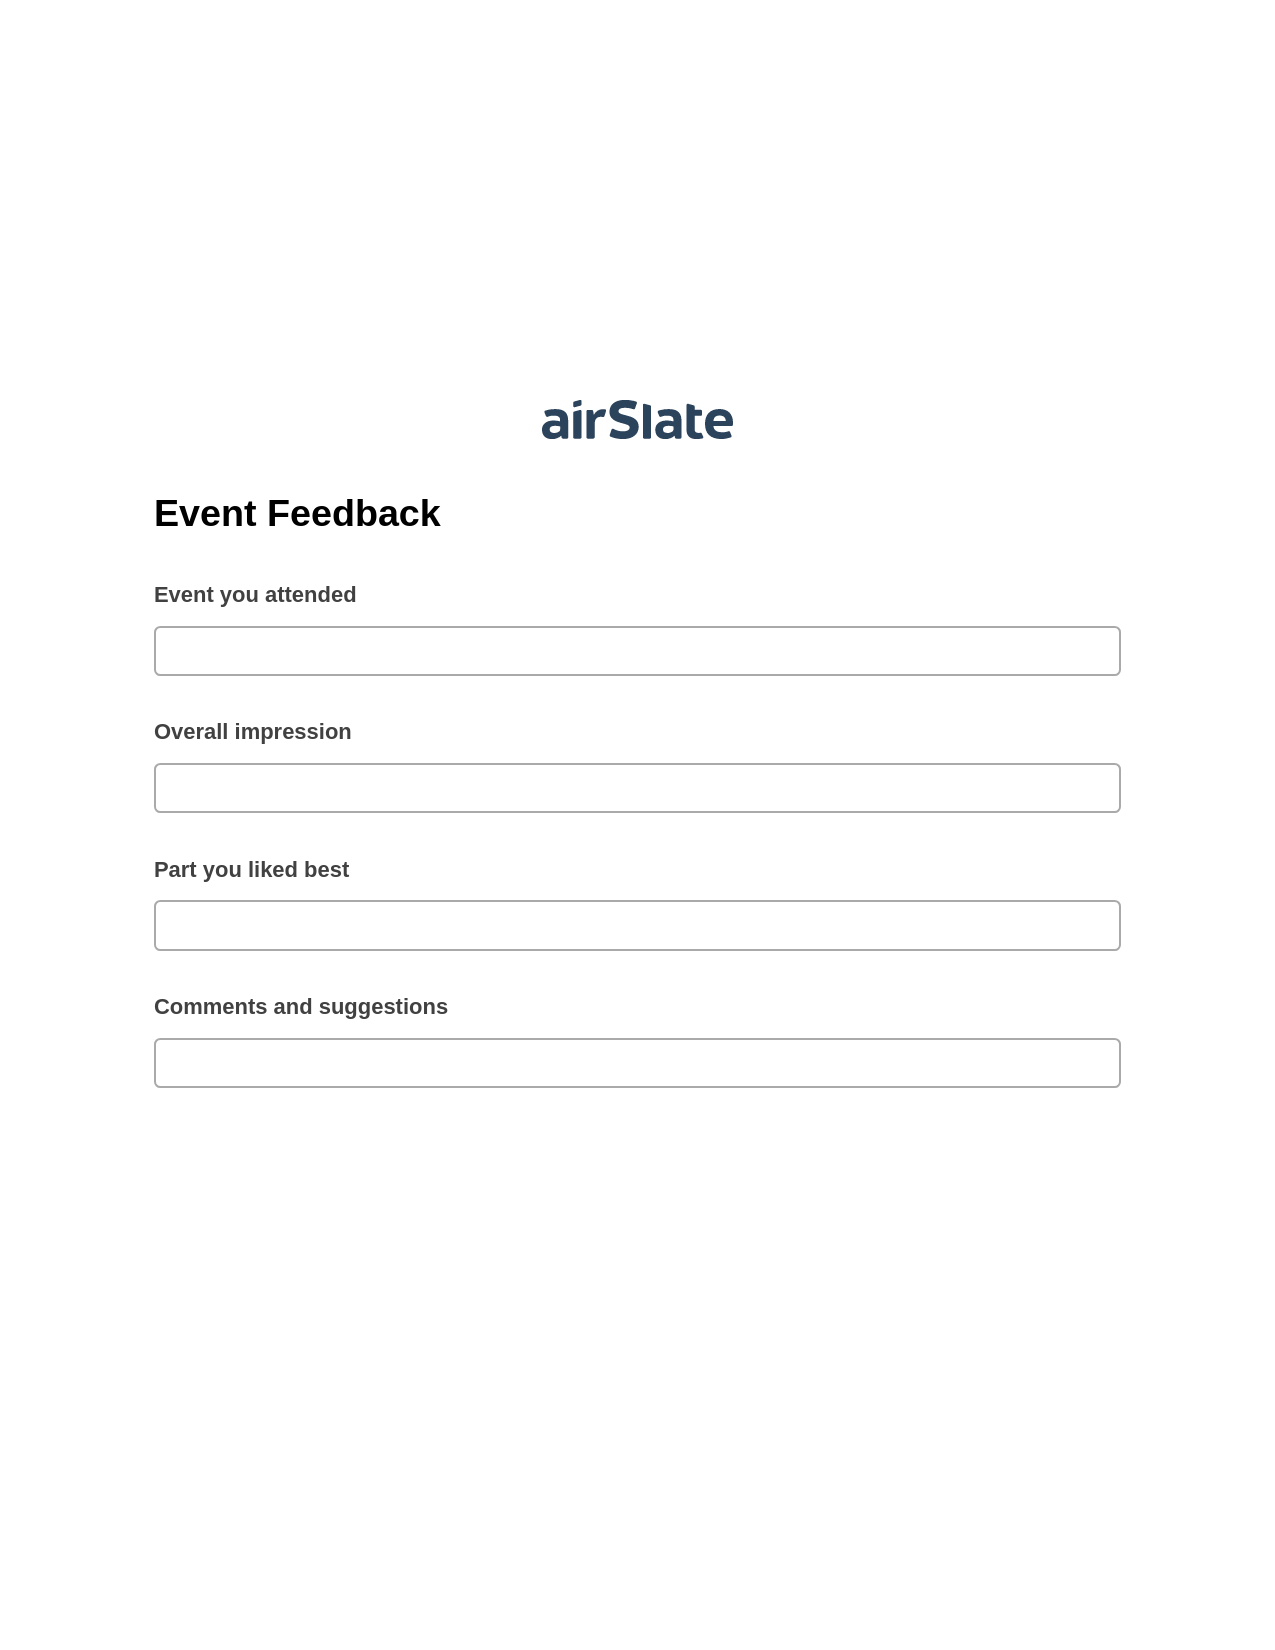 Event Feedback Pre-fill Slate from MS Dynamics 365 Records Bot, Update MS Dynamics 365 Records Bot, Export to NetSuite Record Bot